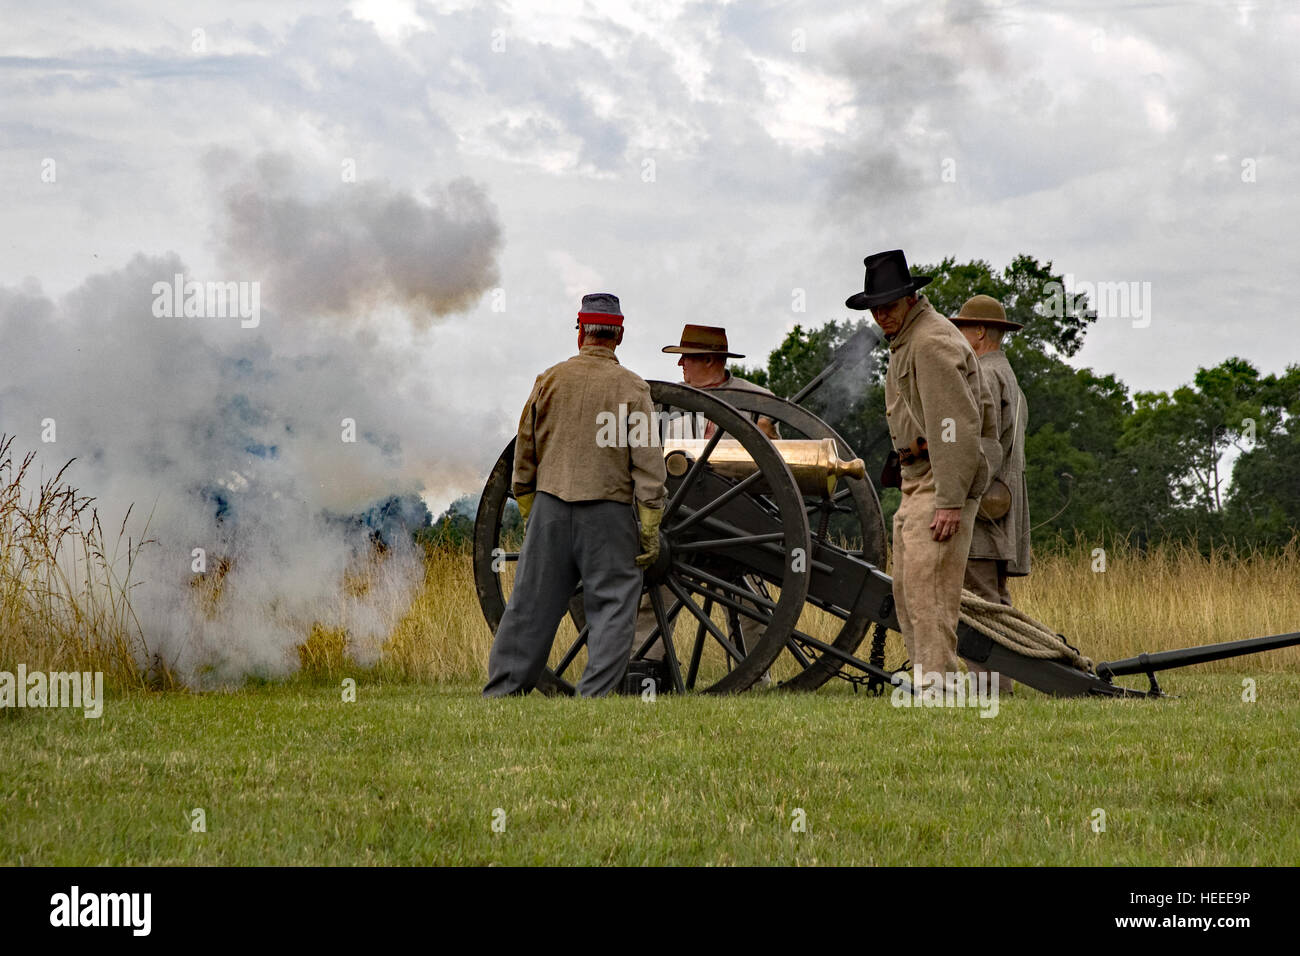 Recreation of cannon firing at Chickamauga & Chattanooga National Military Park Civil War battle site in Tennessee and Georgia Stock Photo